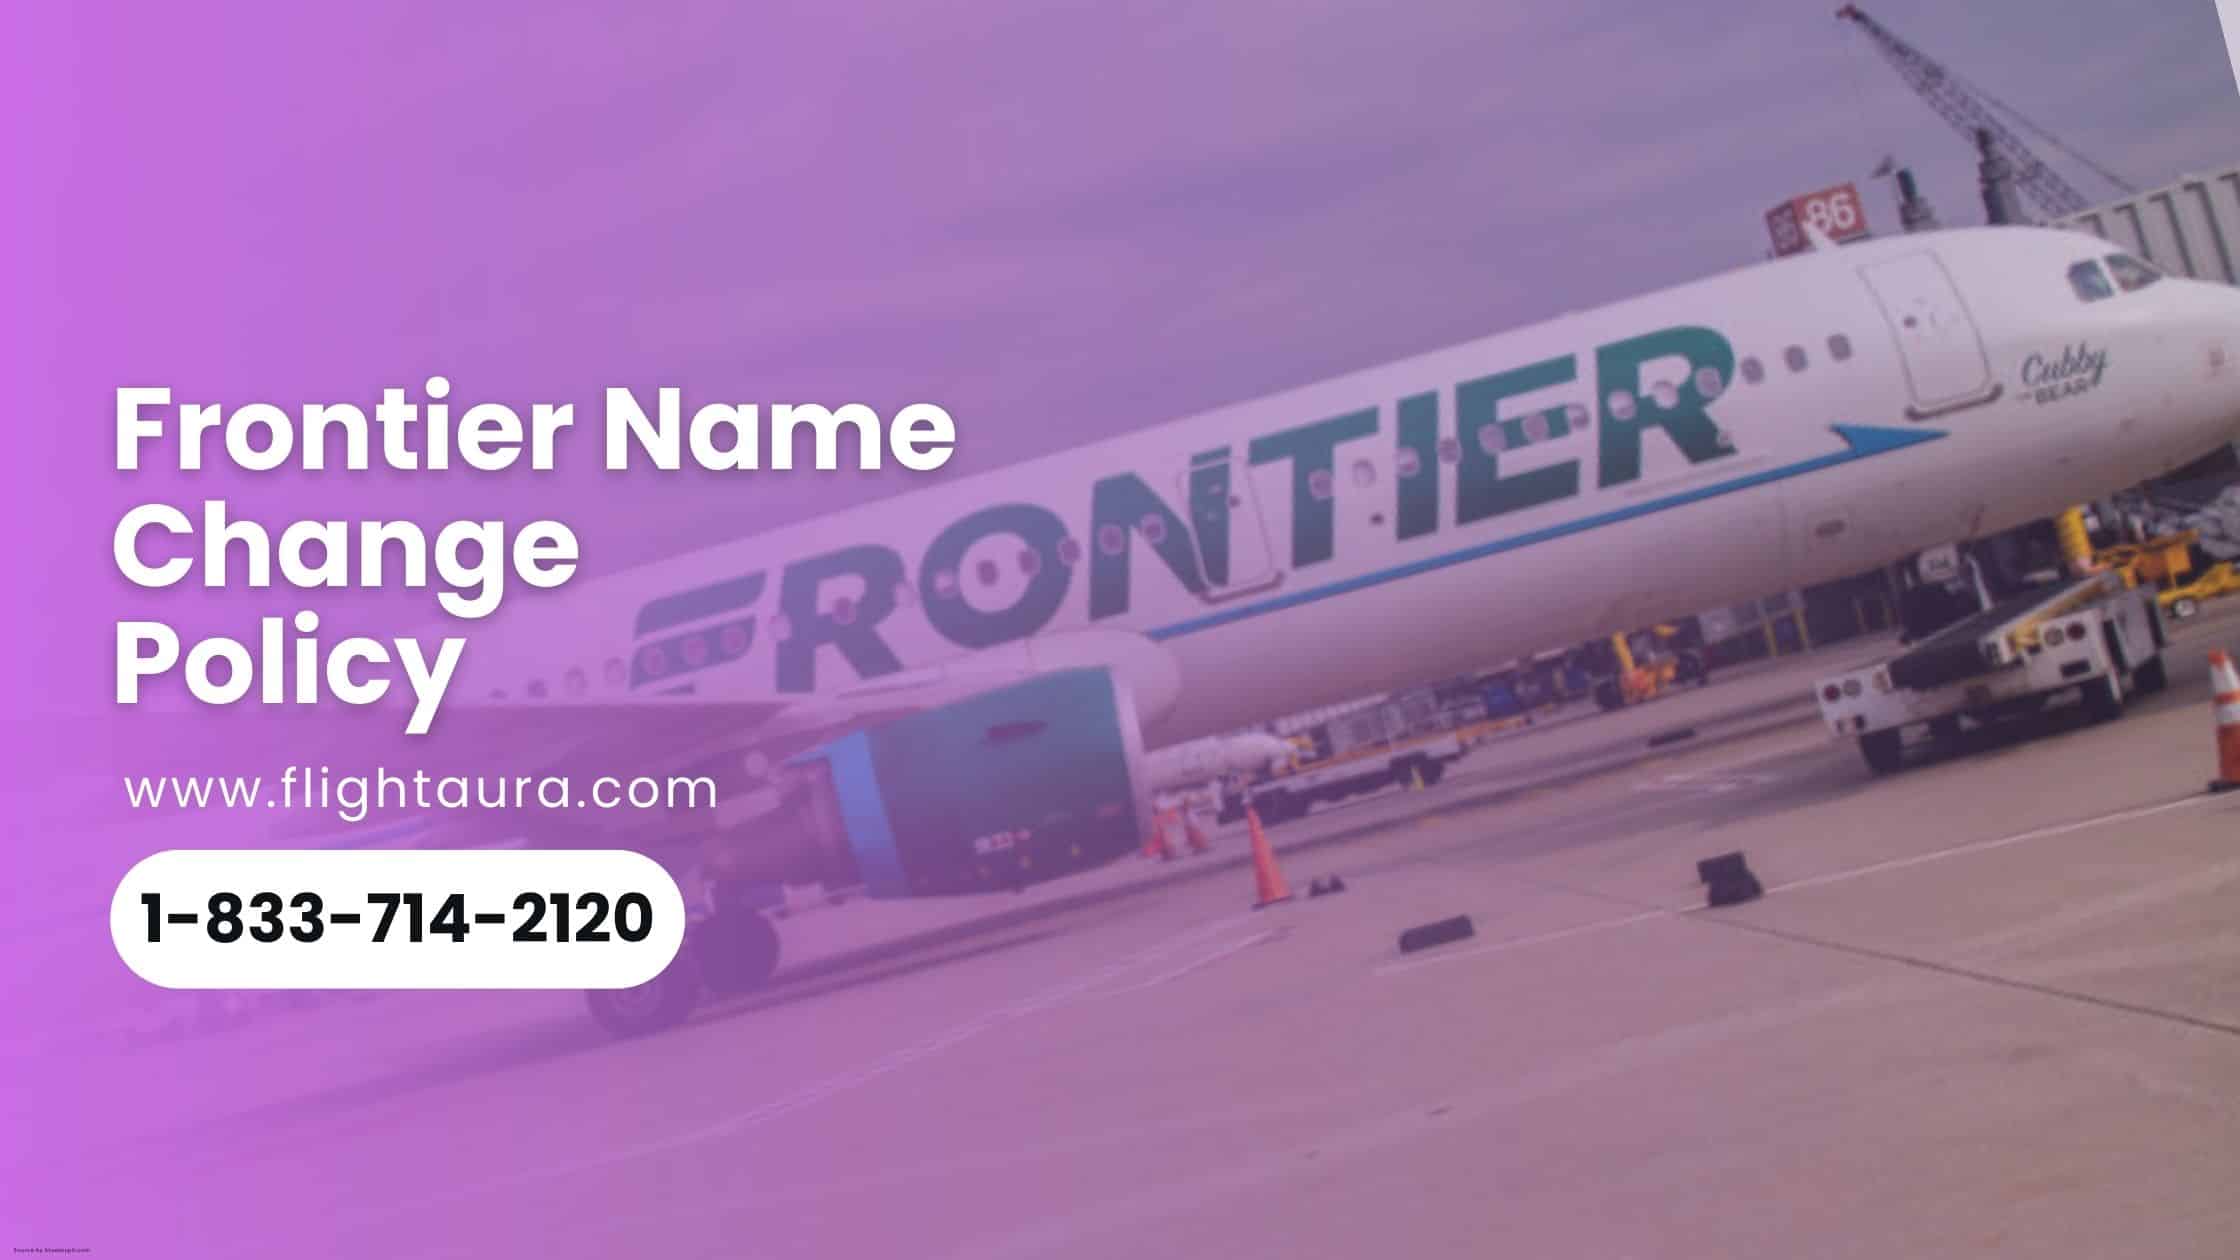 Frontier name change policy fee and price